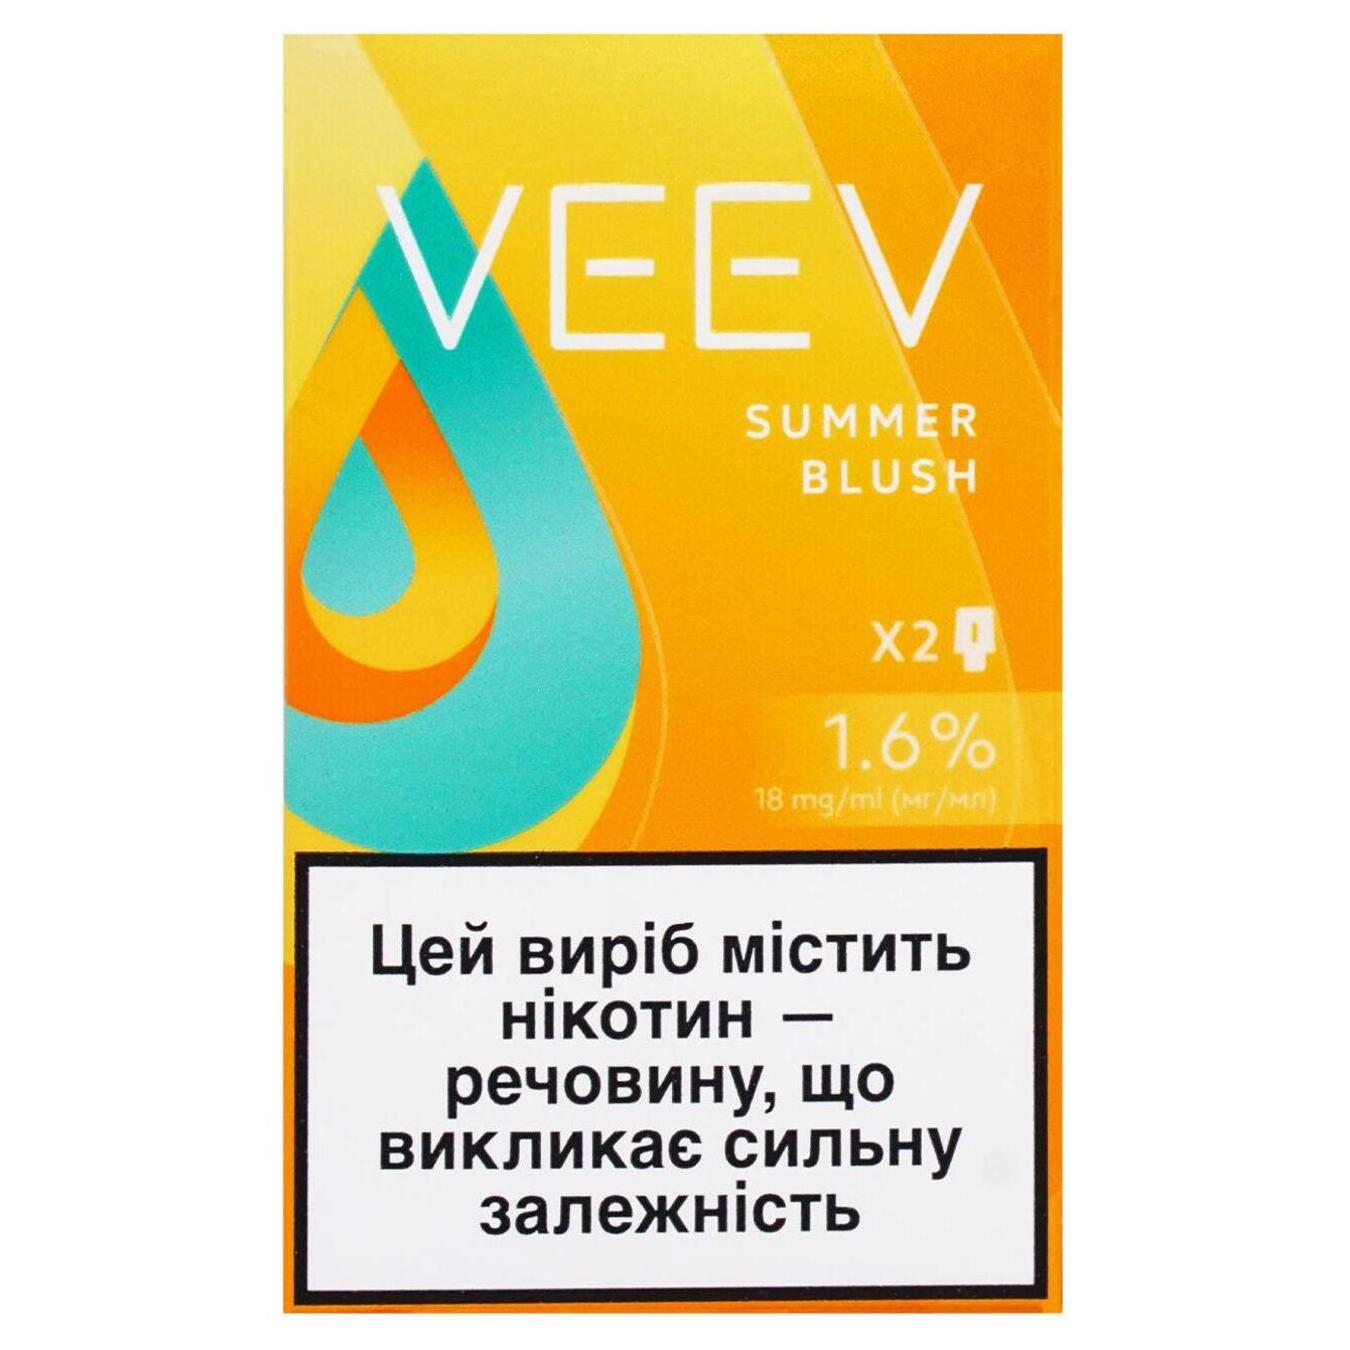 Cartridge VEEV Summer Blush 1.6% (the price is indicated without excise tax)